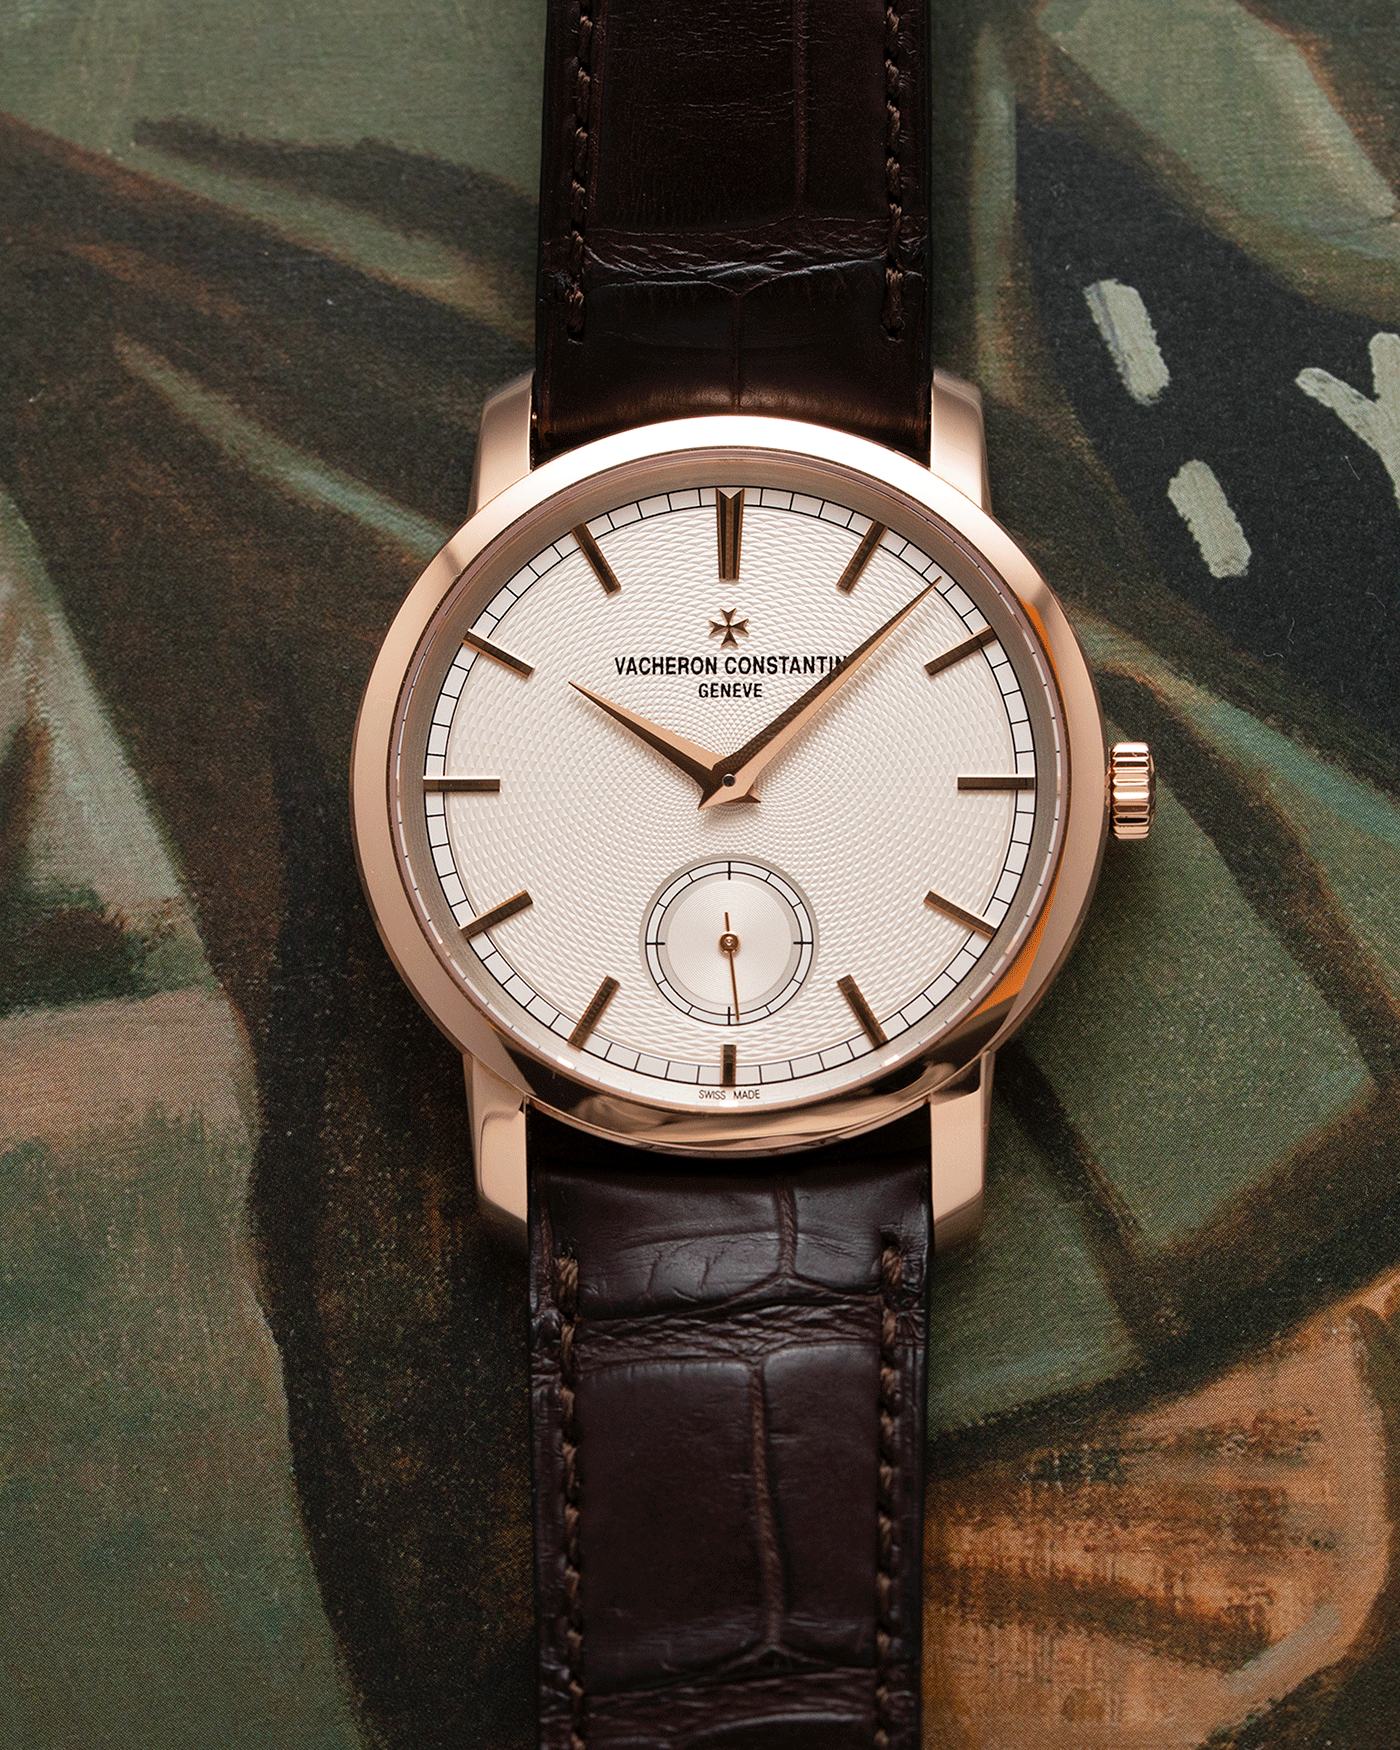 Brand: Vacheron Constantin Year: 2018 Model: Traditionelle Boutique Edition Reference Number: 82172 Material: 18k Rose Gold Movement: Manually-Wound In-House Cal. 4400AS Case Diameter: 38mm Bracelet/Strap: Vacheron Constantin Dark Brown Alligator Strap with 18k Rose Gold Tang Buckle